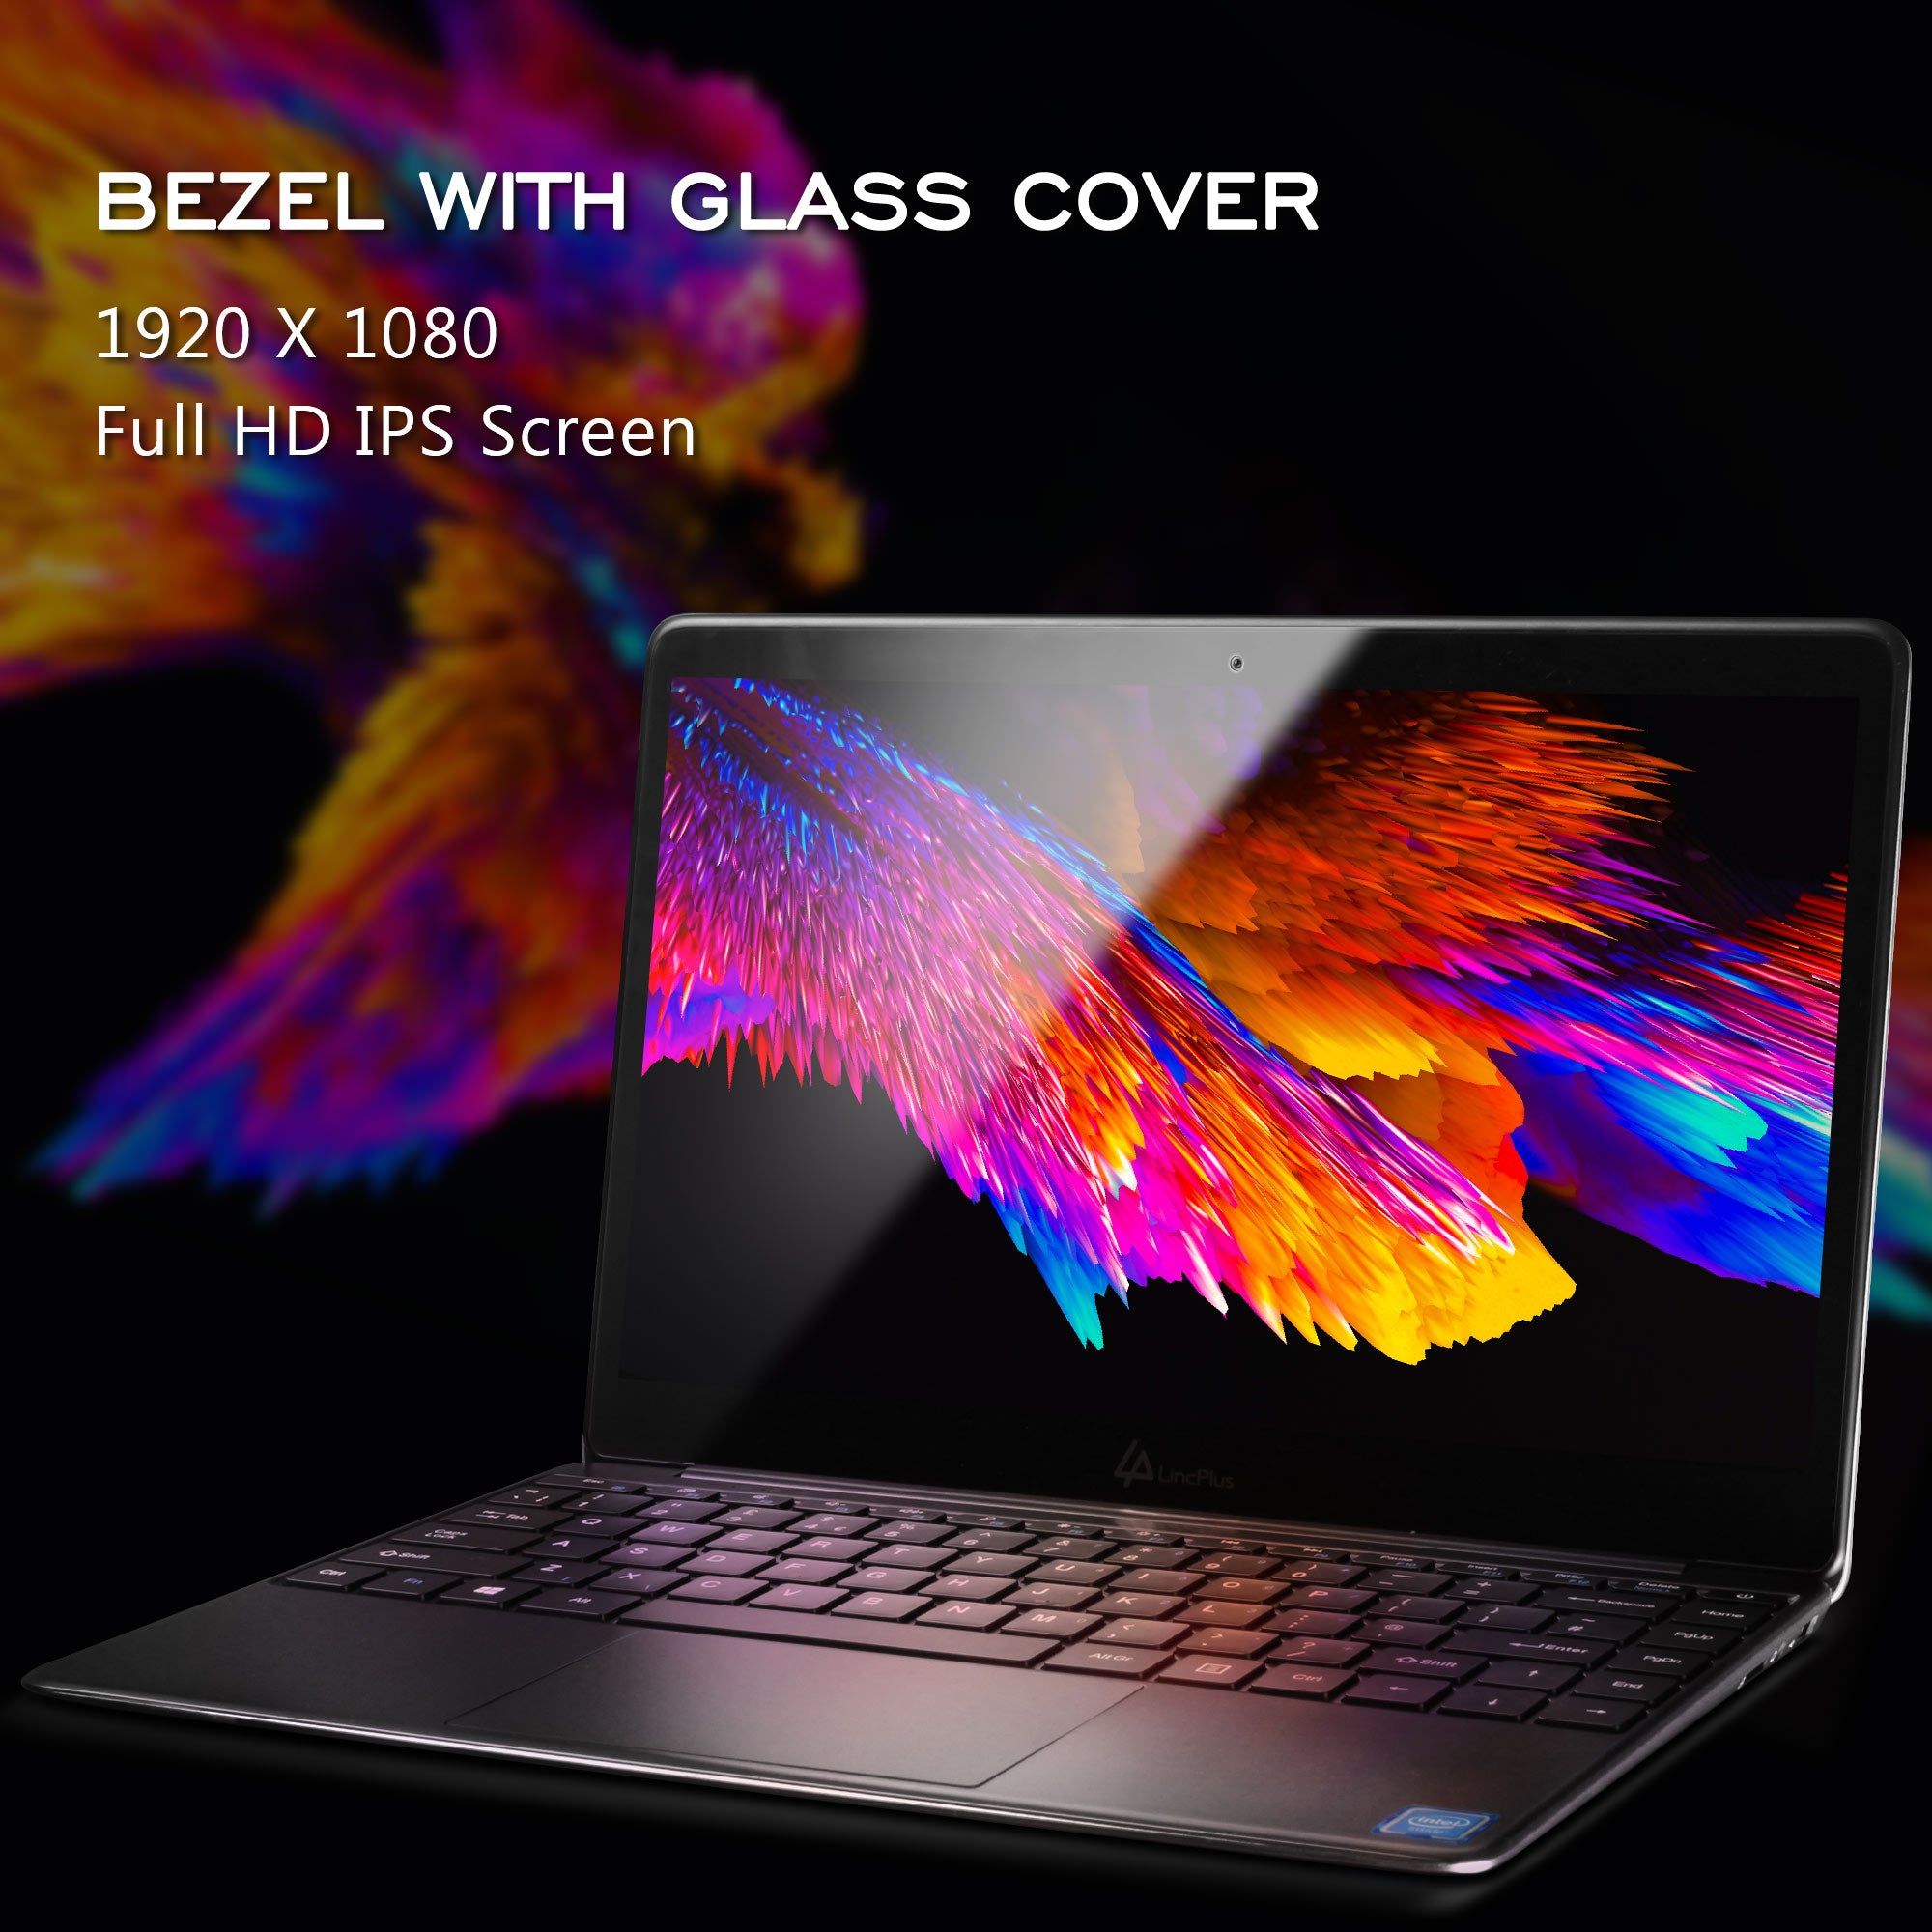 1080p laptop with glass cover